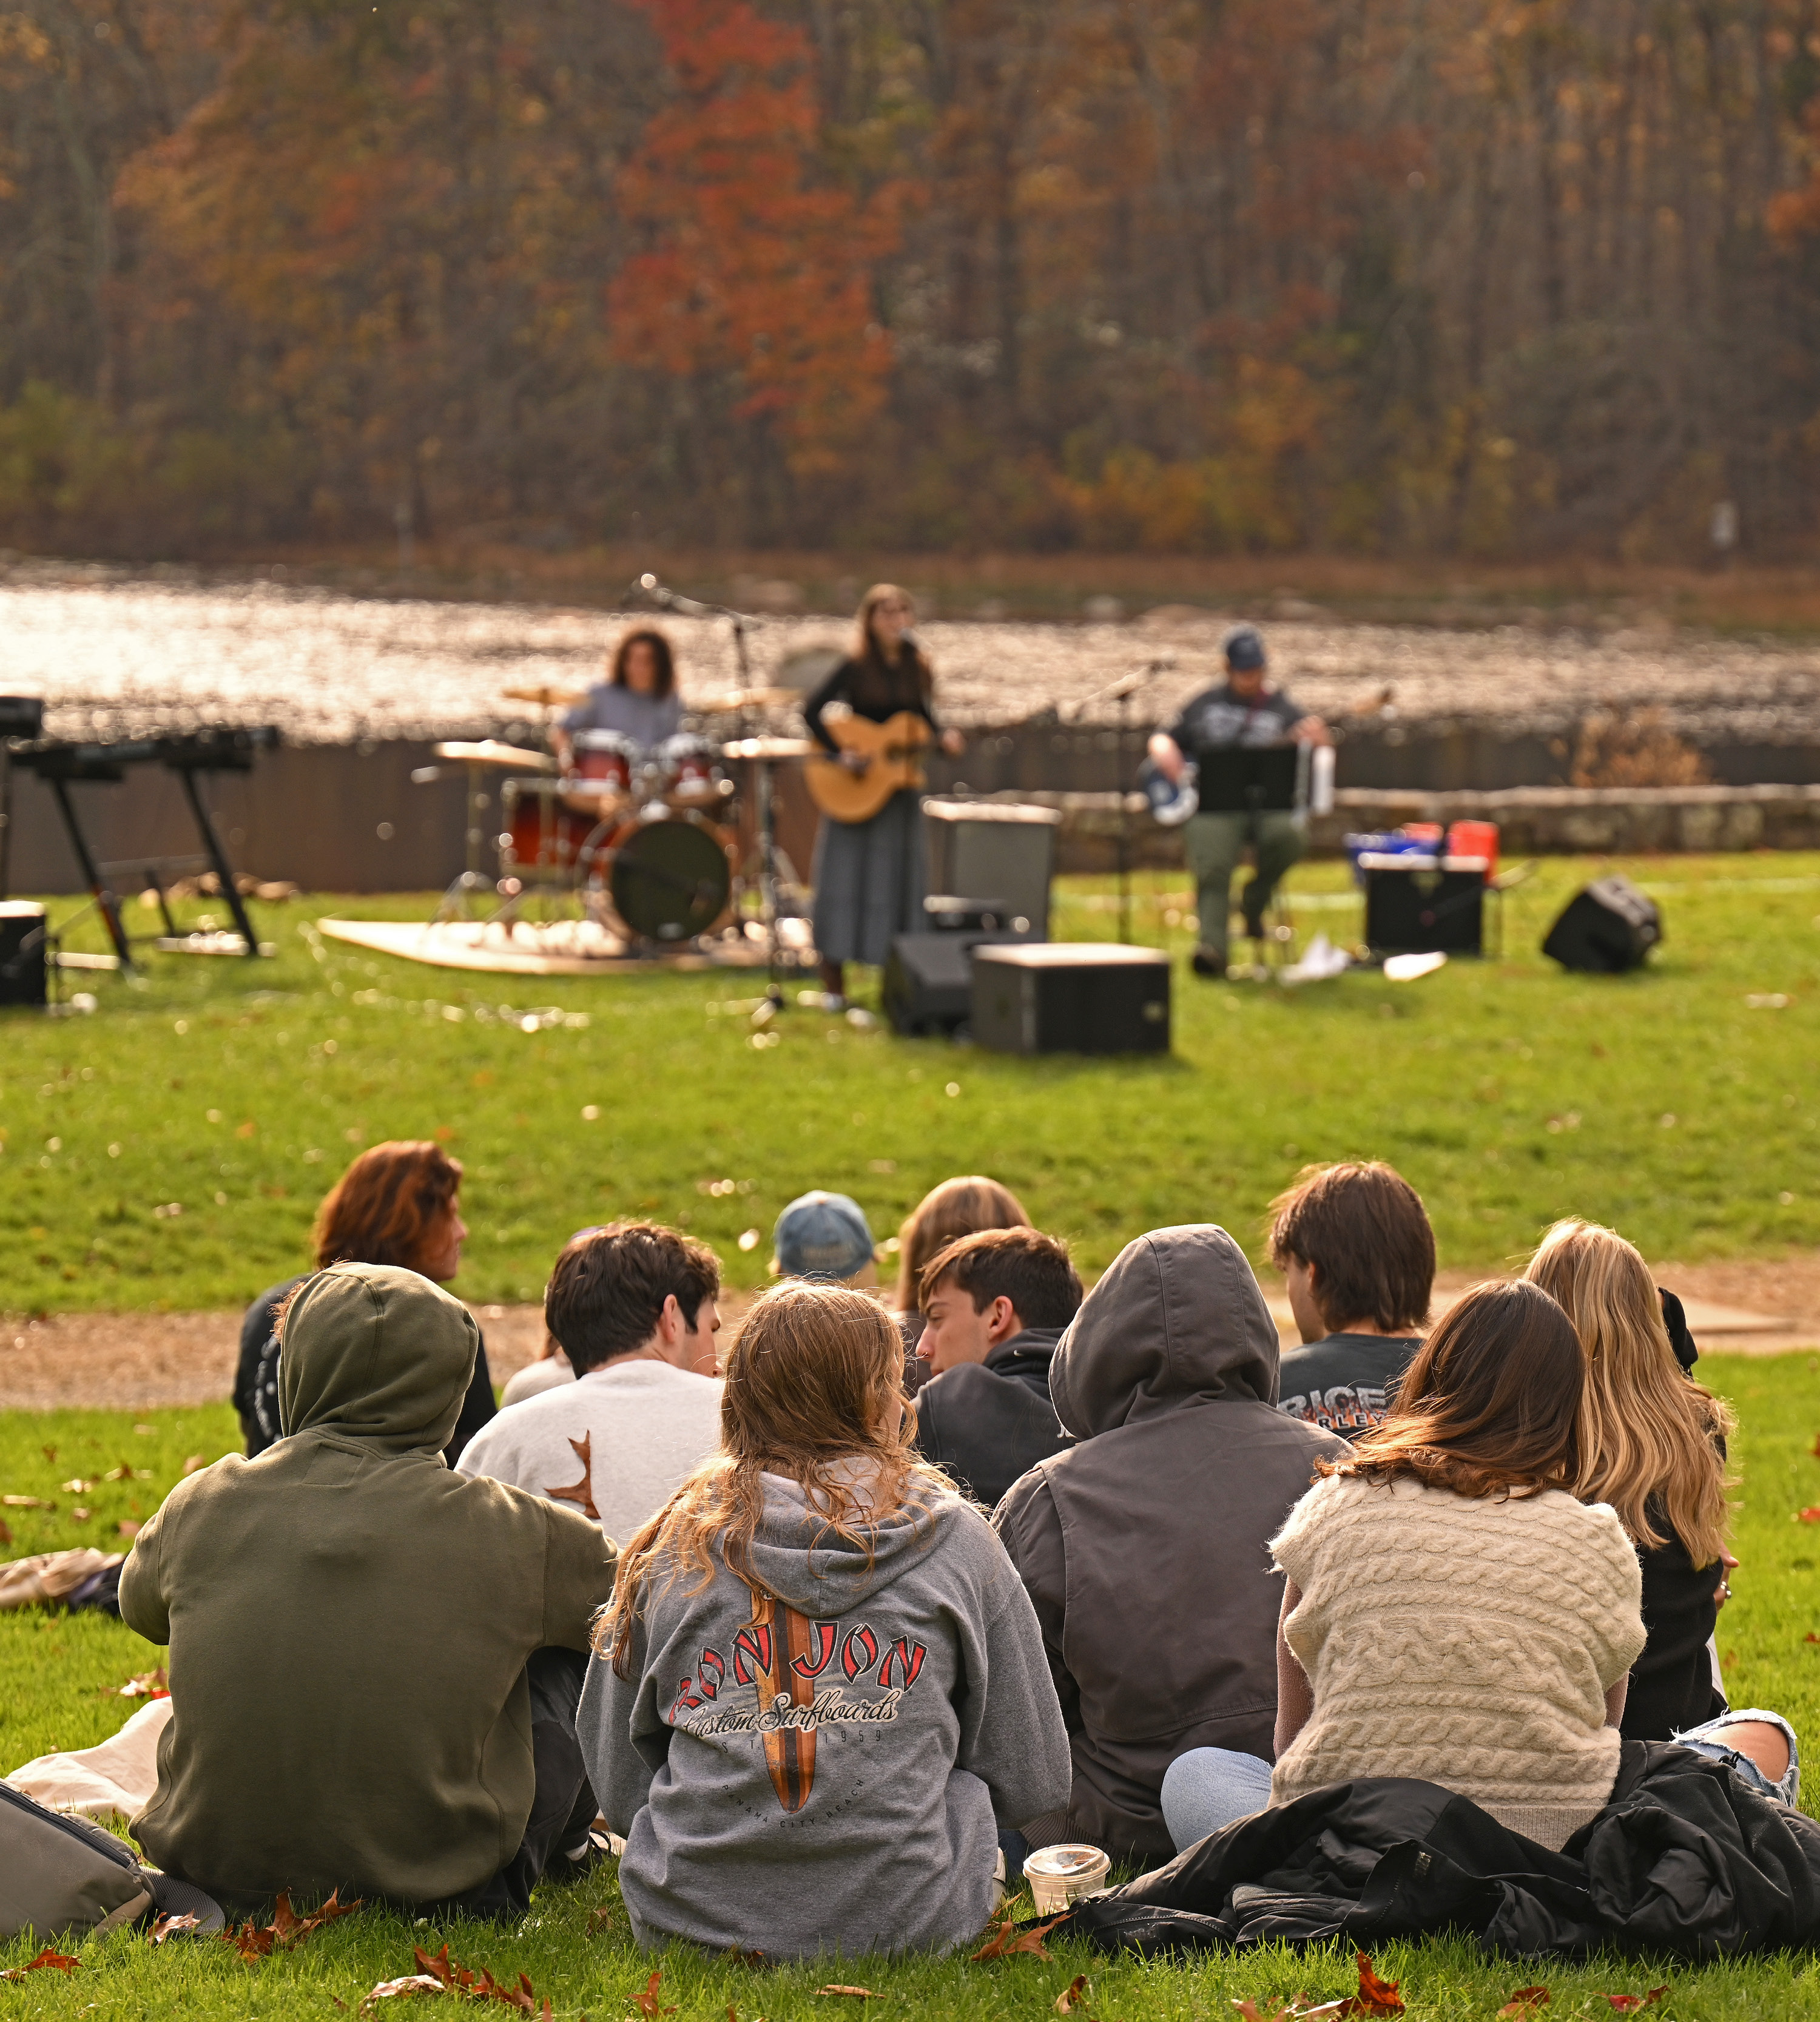 Students listen to music in the Arboretum